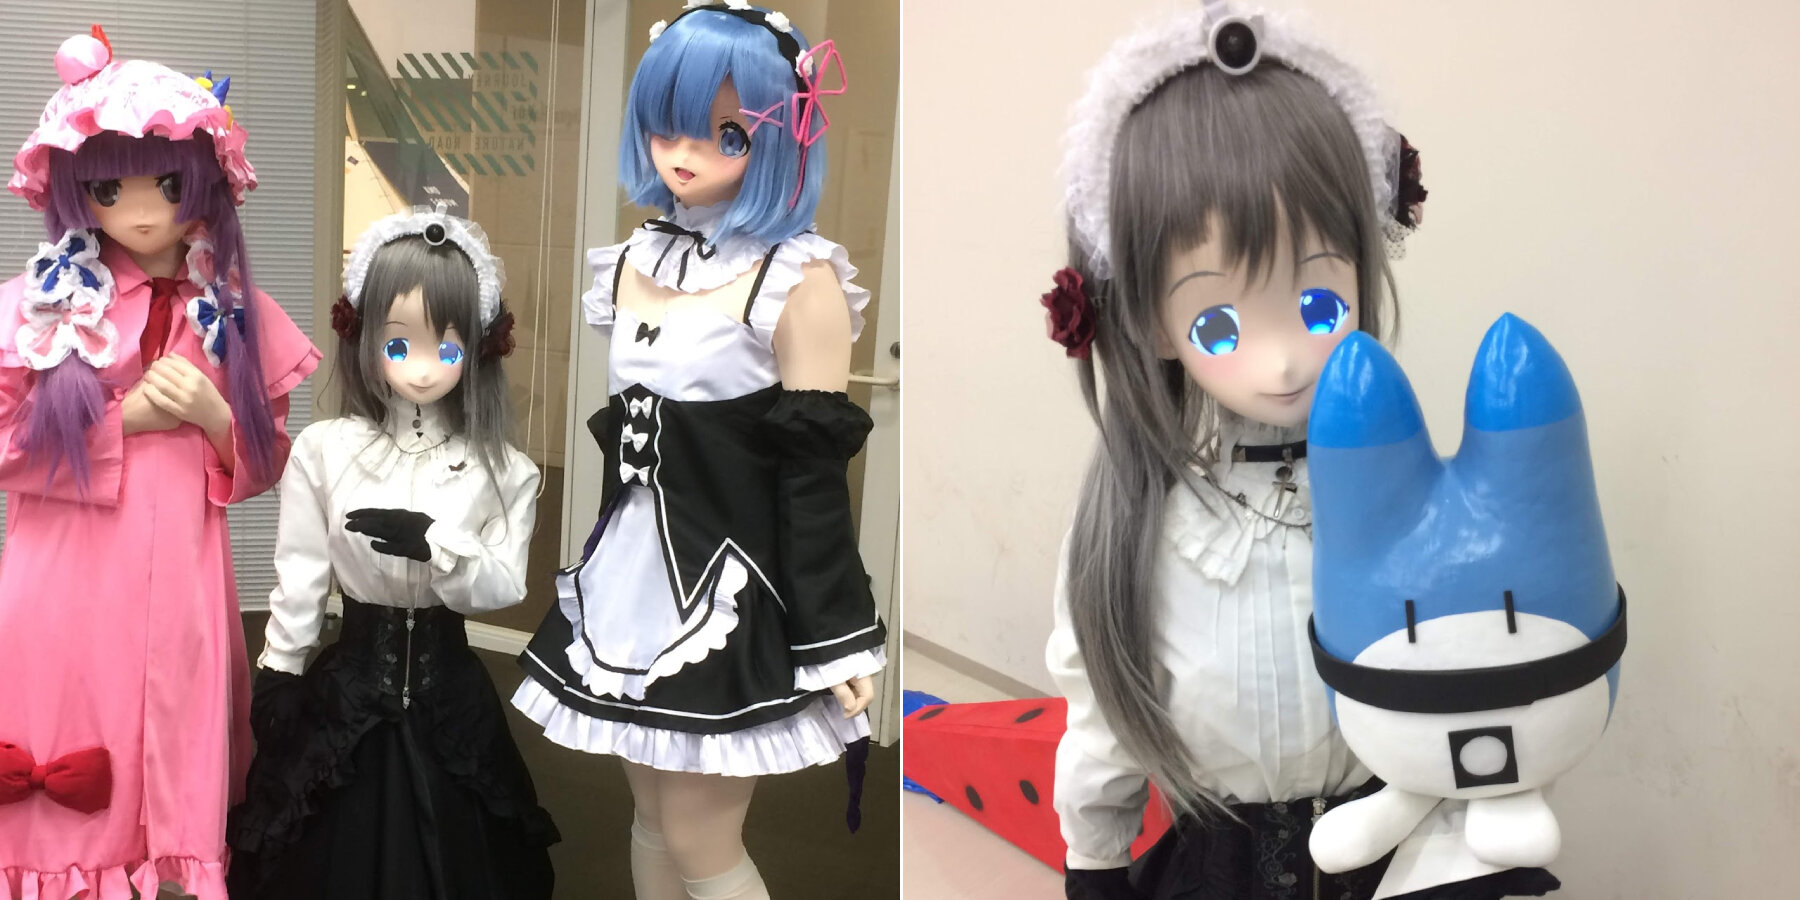 anime-inspired robot maids entertain & serve customers in a japanese cafe